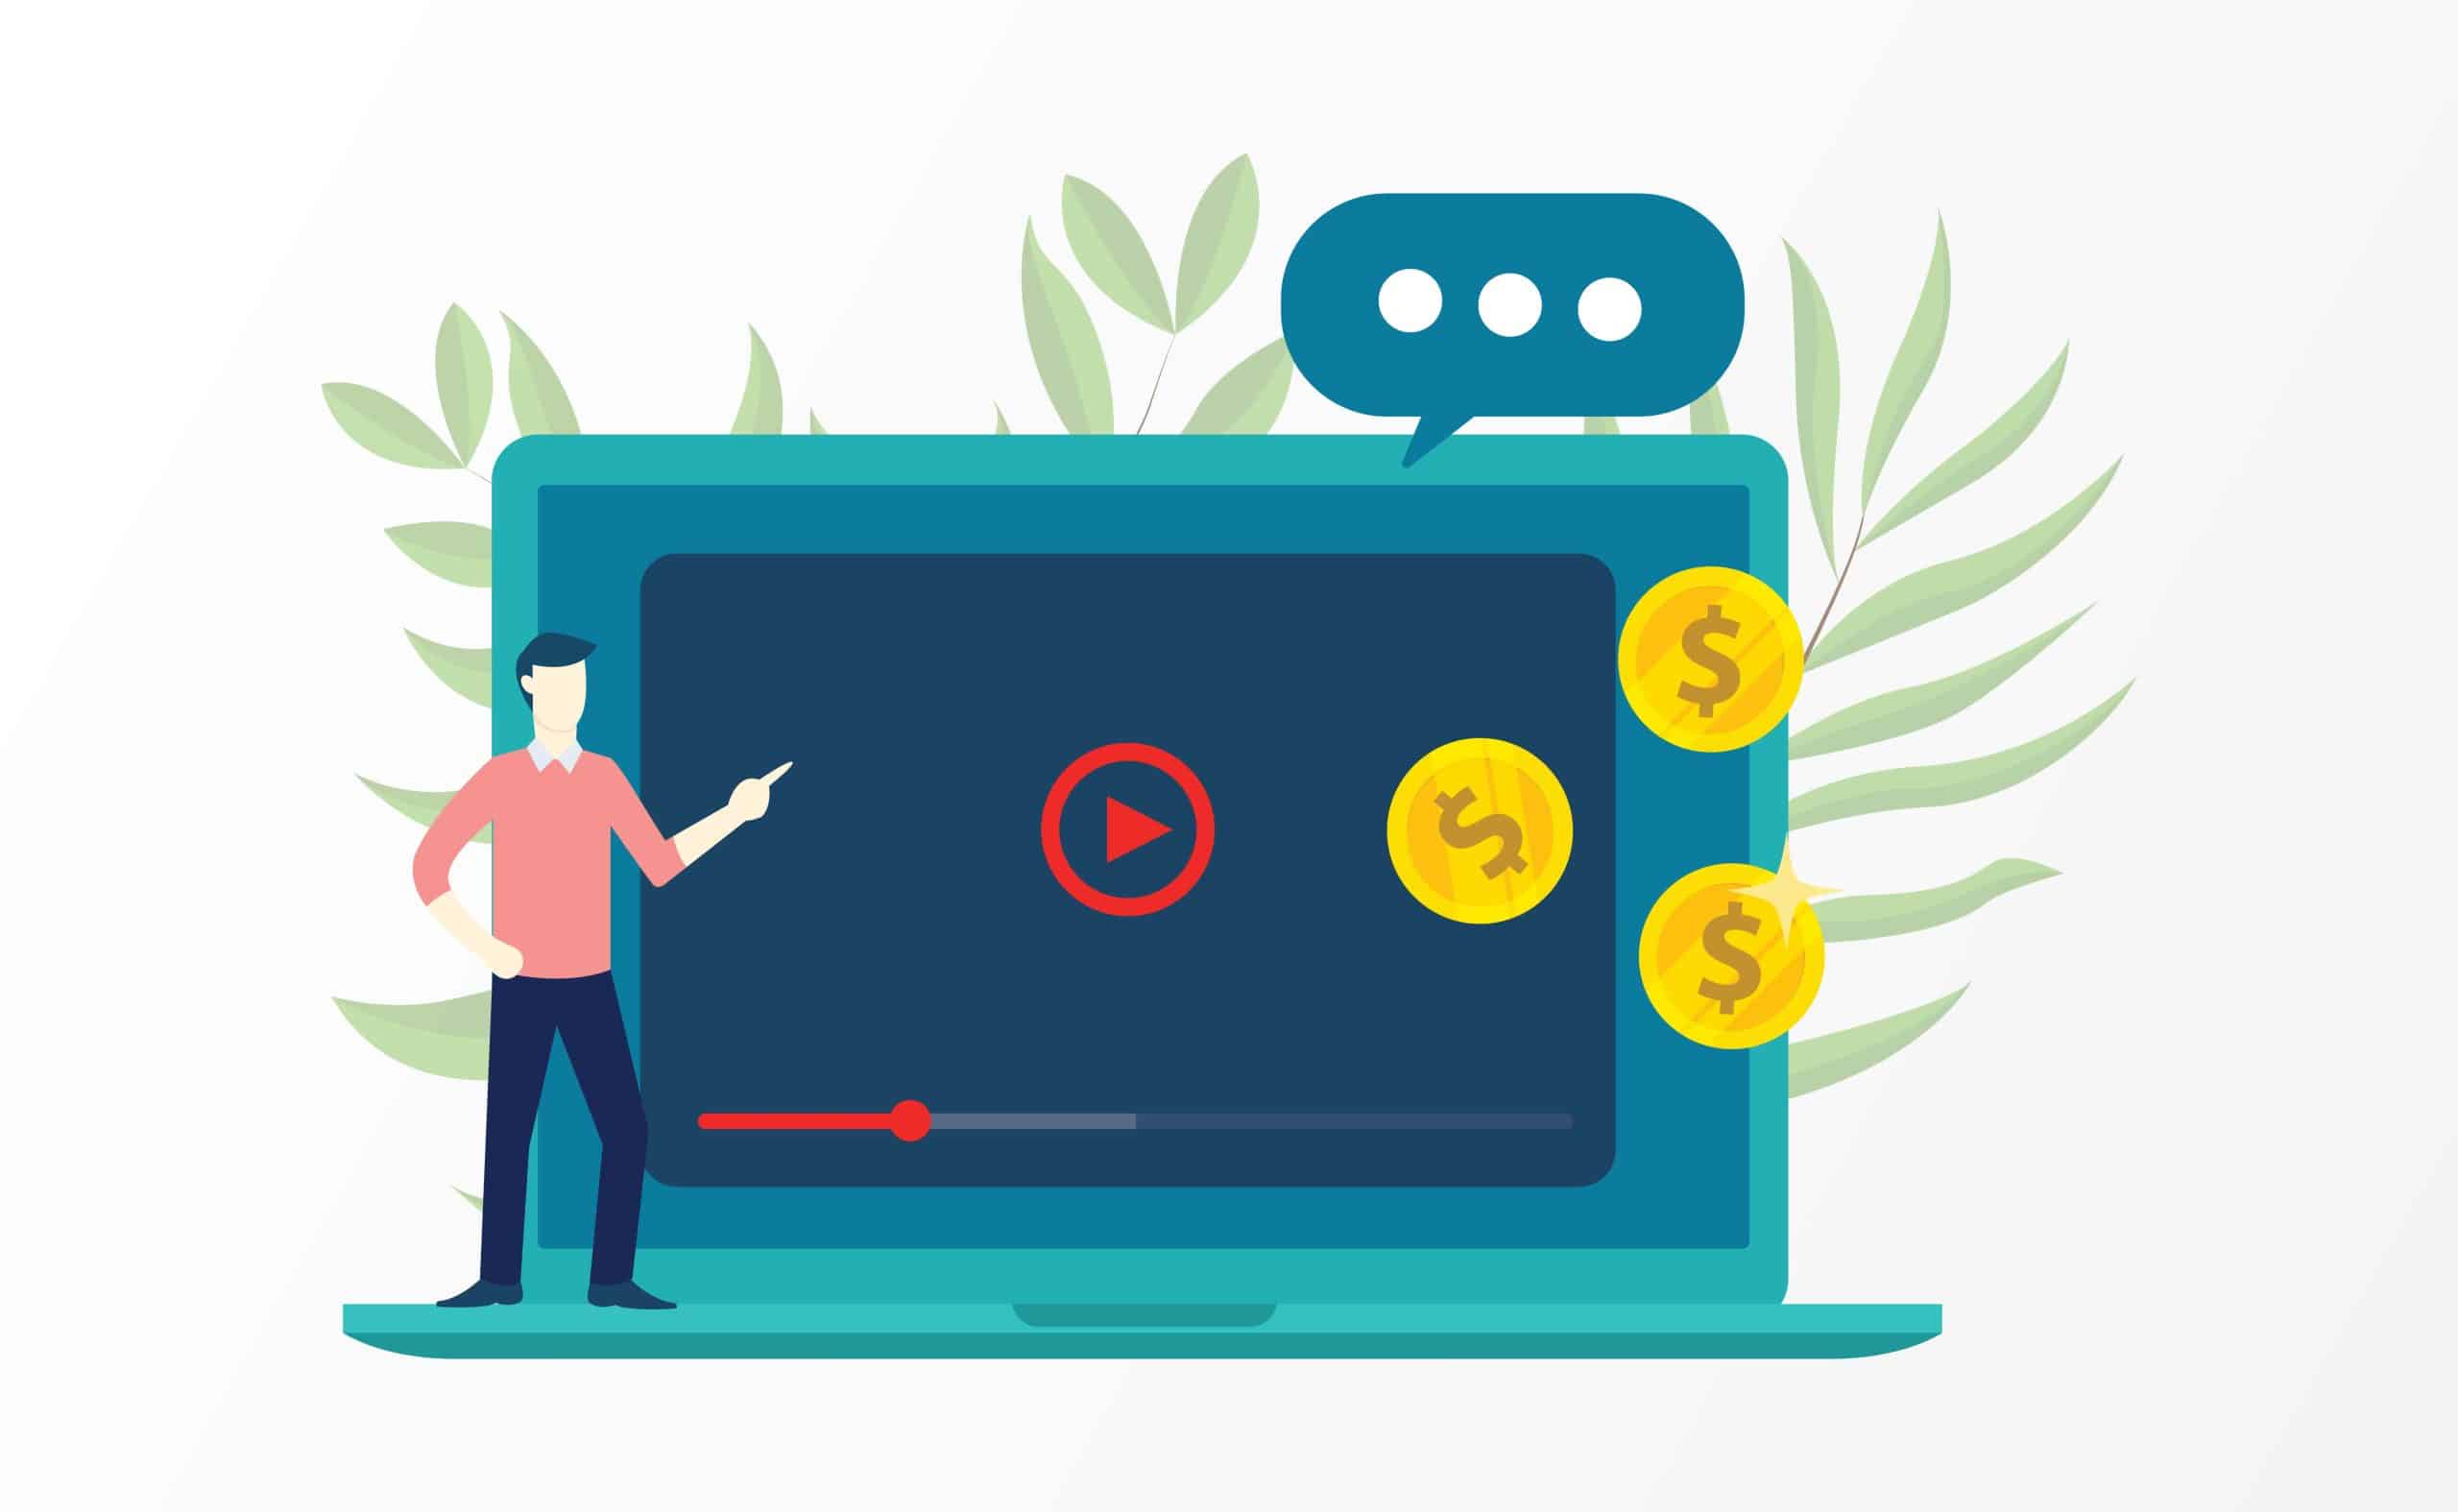 What is an Explainer Video?